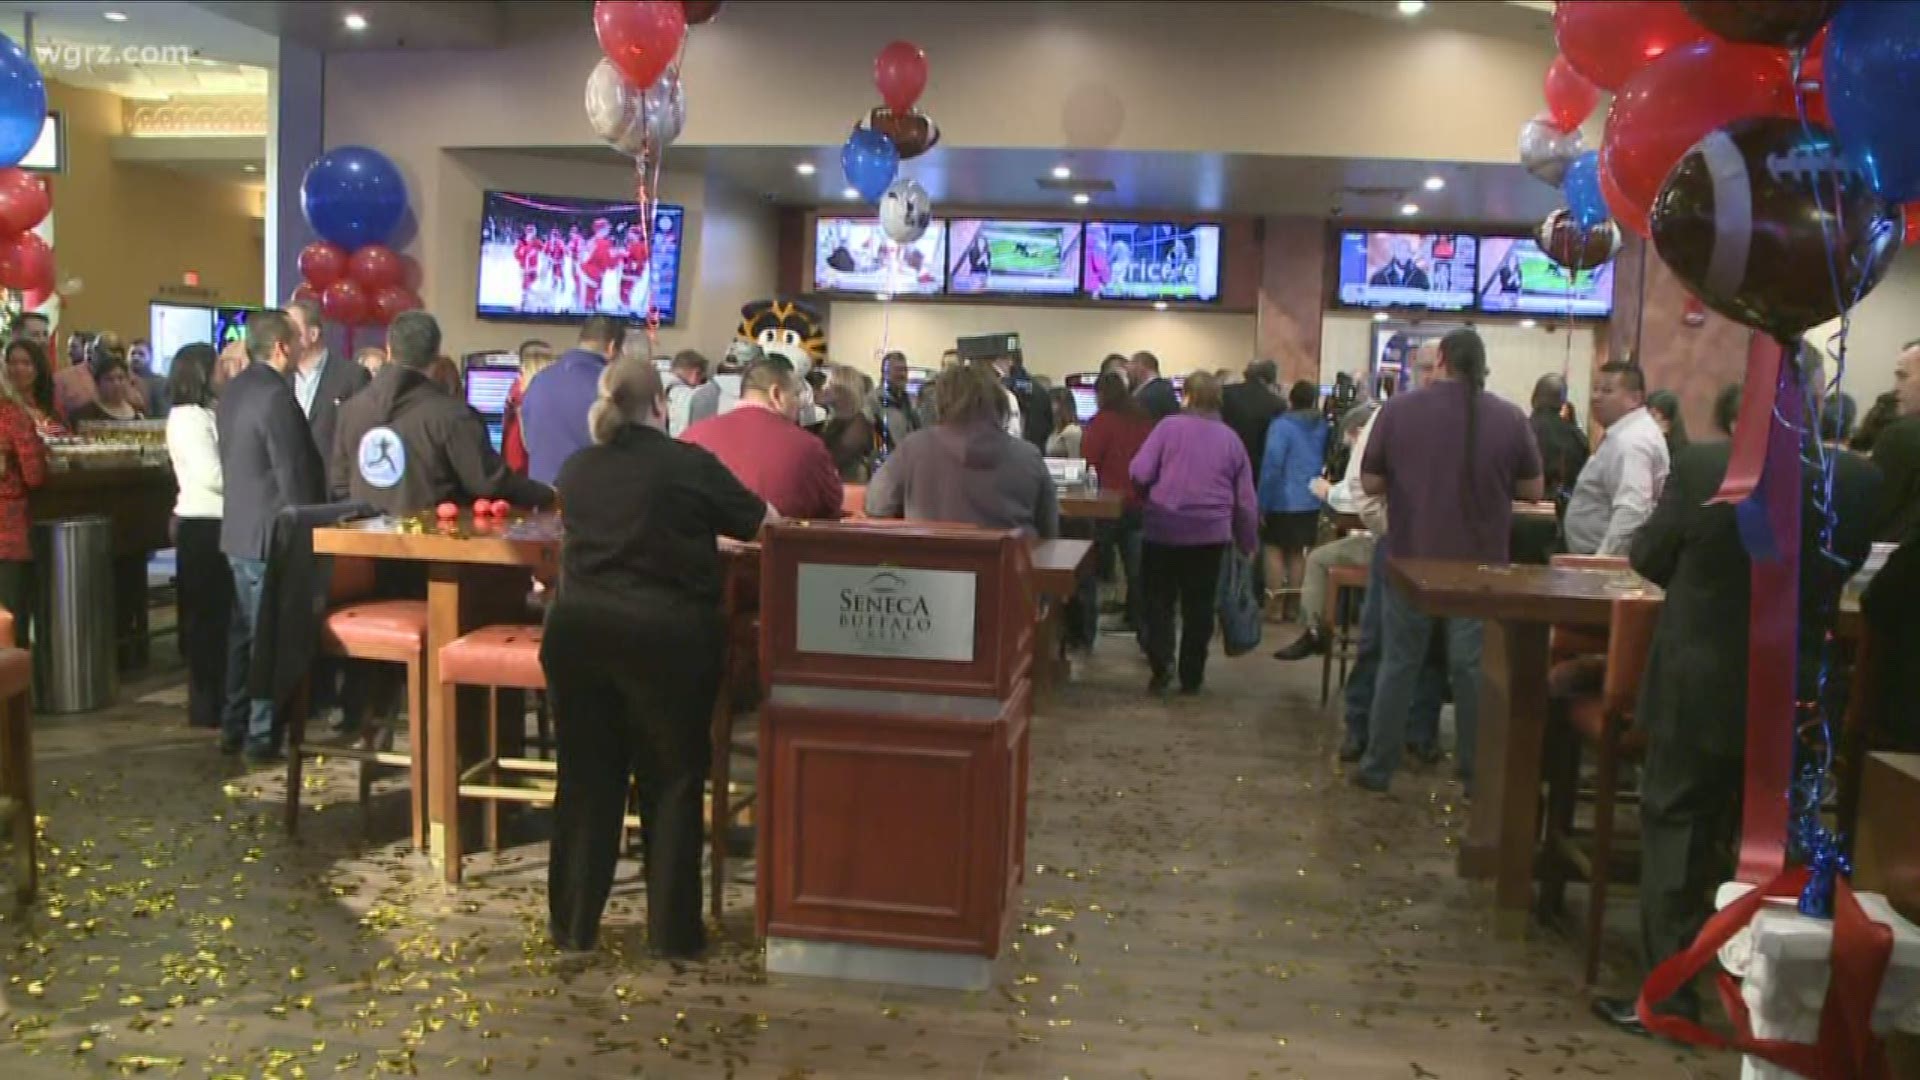 the first sports lounge like this for the Seneca Gaming Corporation— with plans for similar set-ups planned for its casinos in Salamanca and Niagara Falls